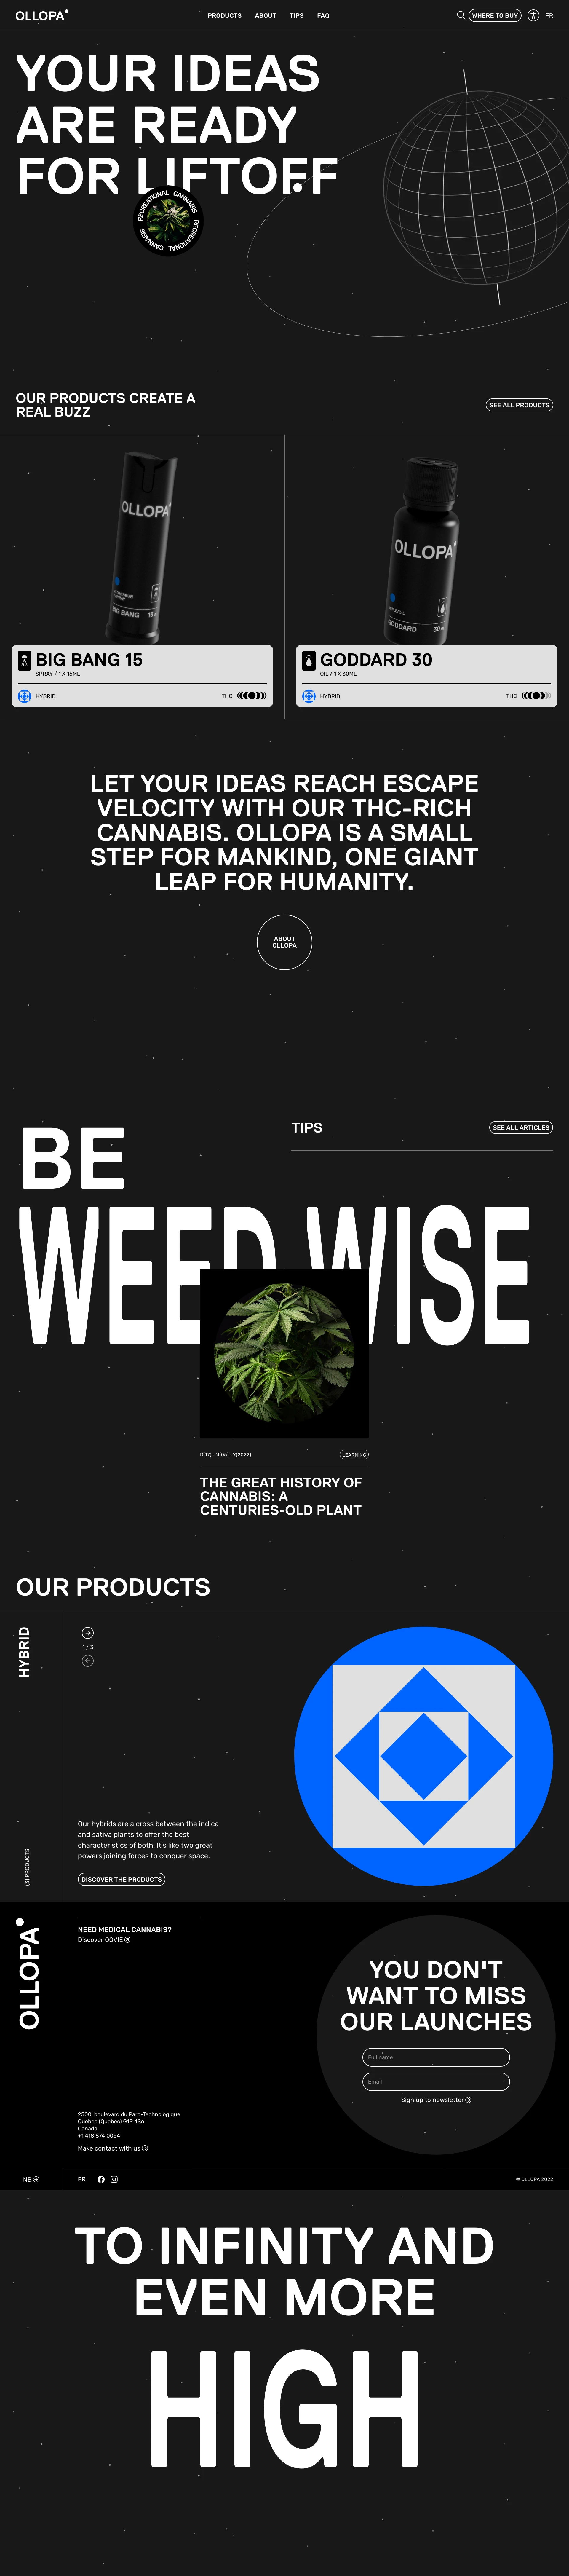 OLLOPA Landing Page Example: Your ideas are ready for liftoff with our THC-rich cannabis products produced in our labs. Discover the collection today!